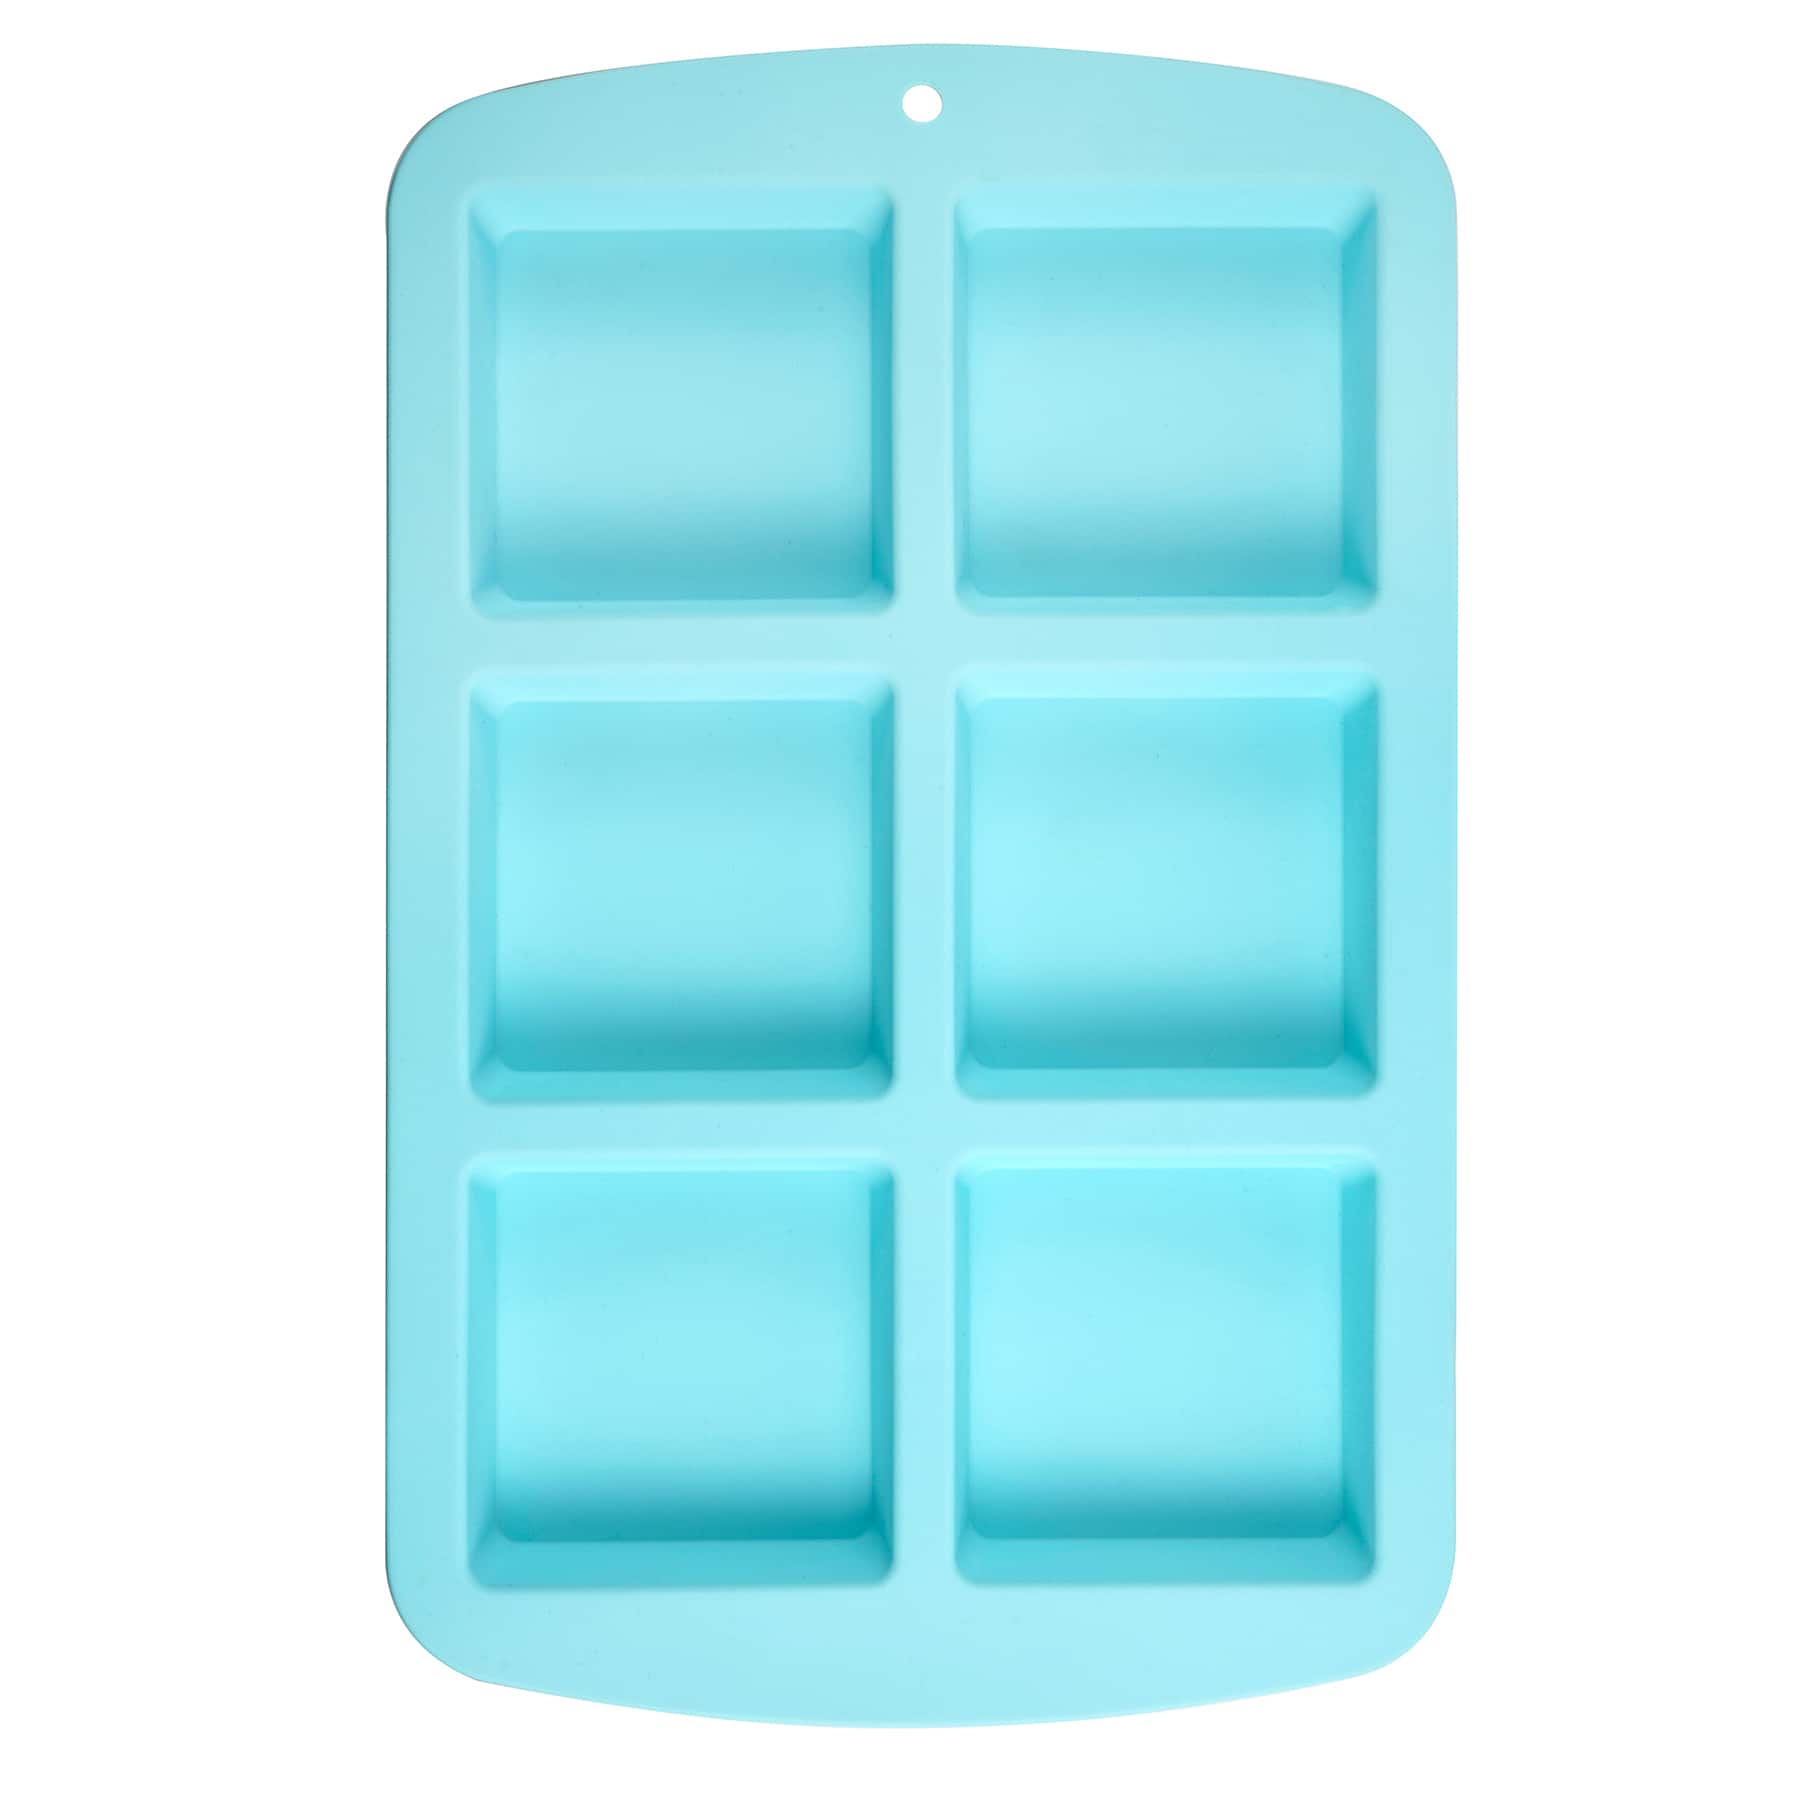 Celebrate It Square Silicone Candy Mold - Each